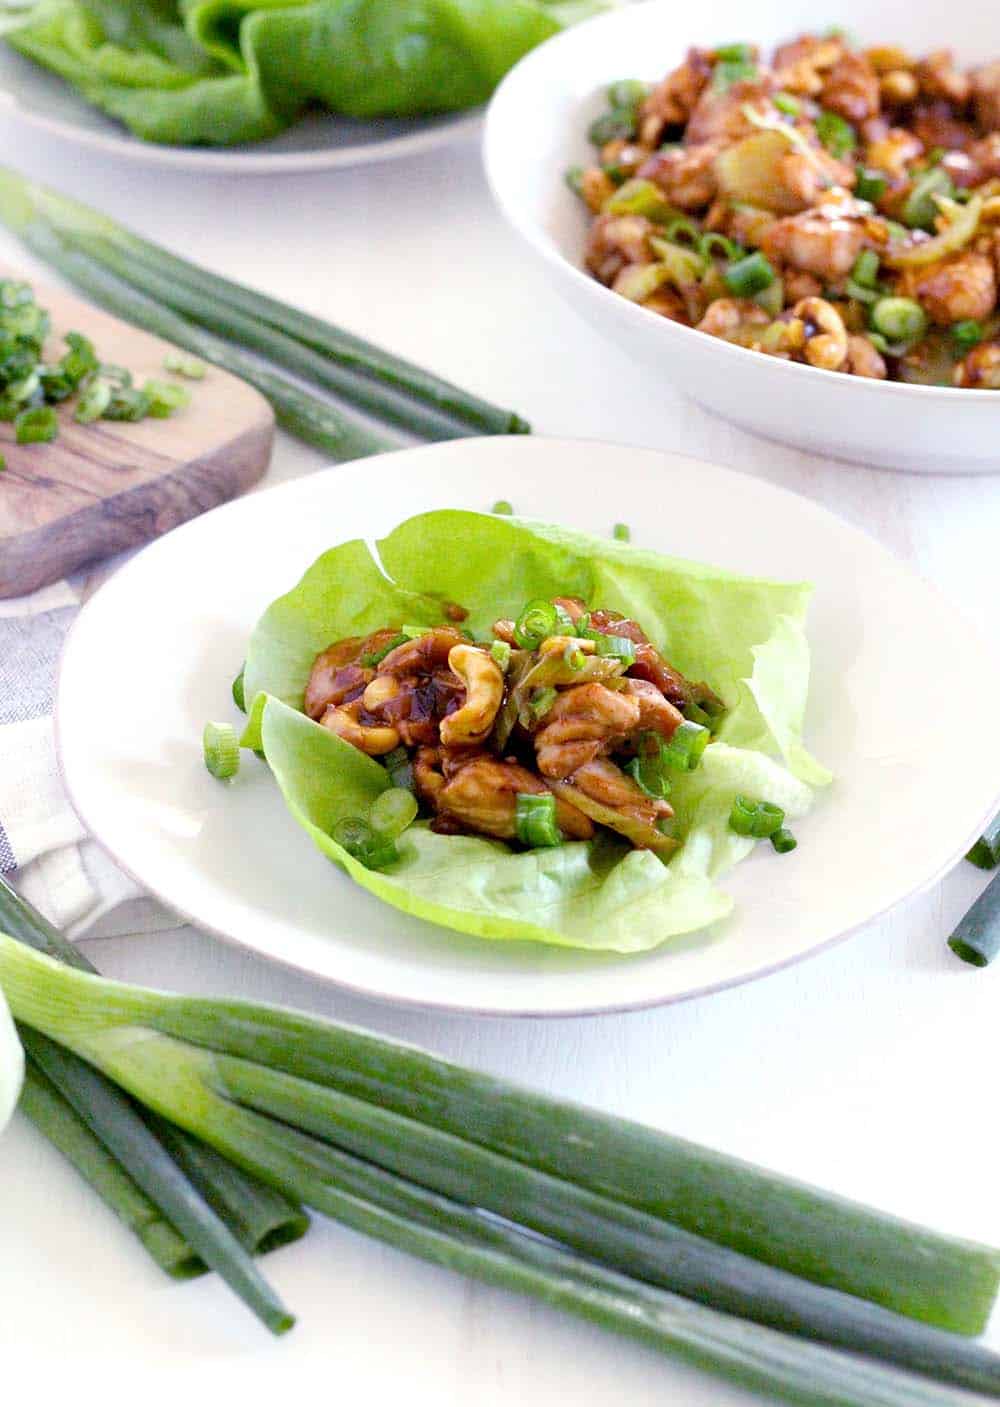 Open lettuce leaf on a white plate, with chicken and cashew mixture placed in the center.